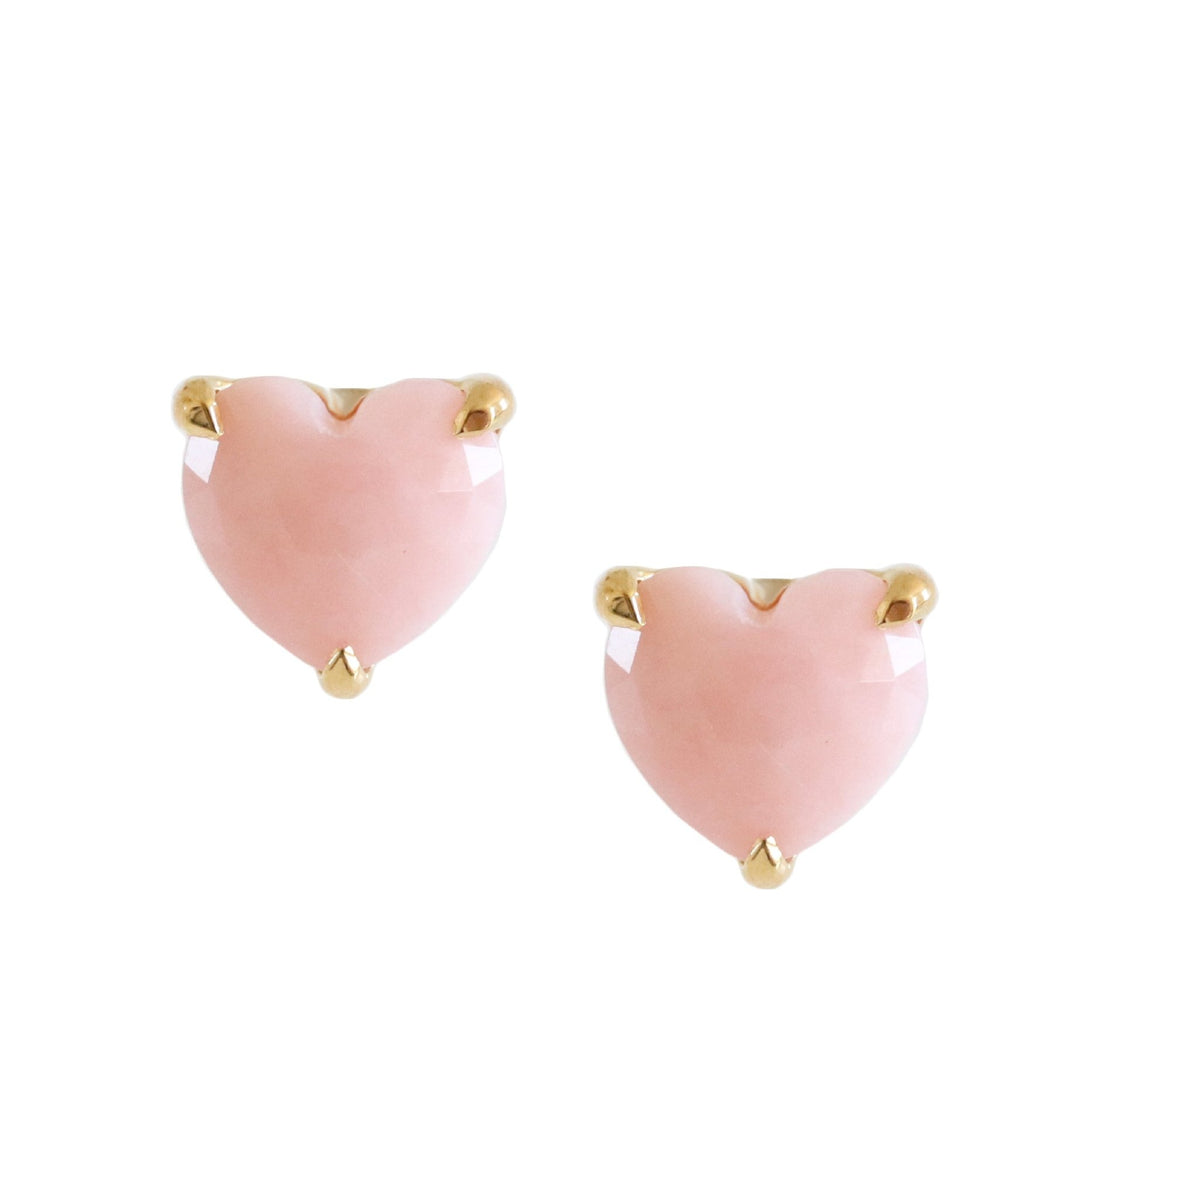 FRAICHE INSPIRE SWEETHEART STUDS - PINK OPAL &amp; GOLD - SO PRETTY CARA COTTER